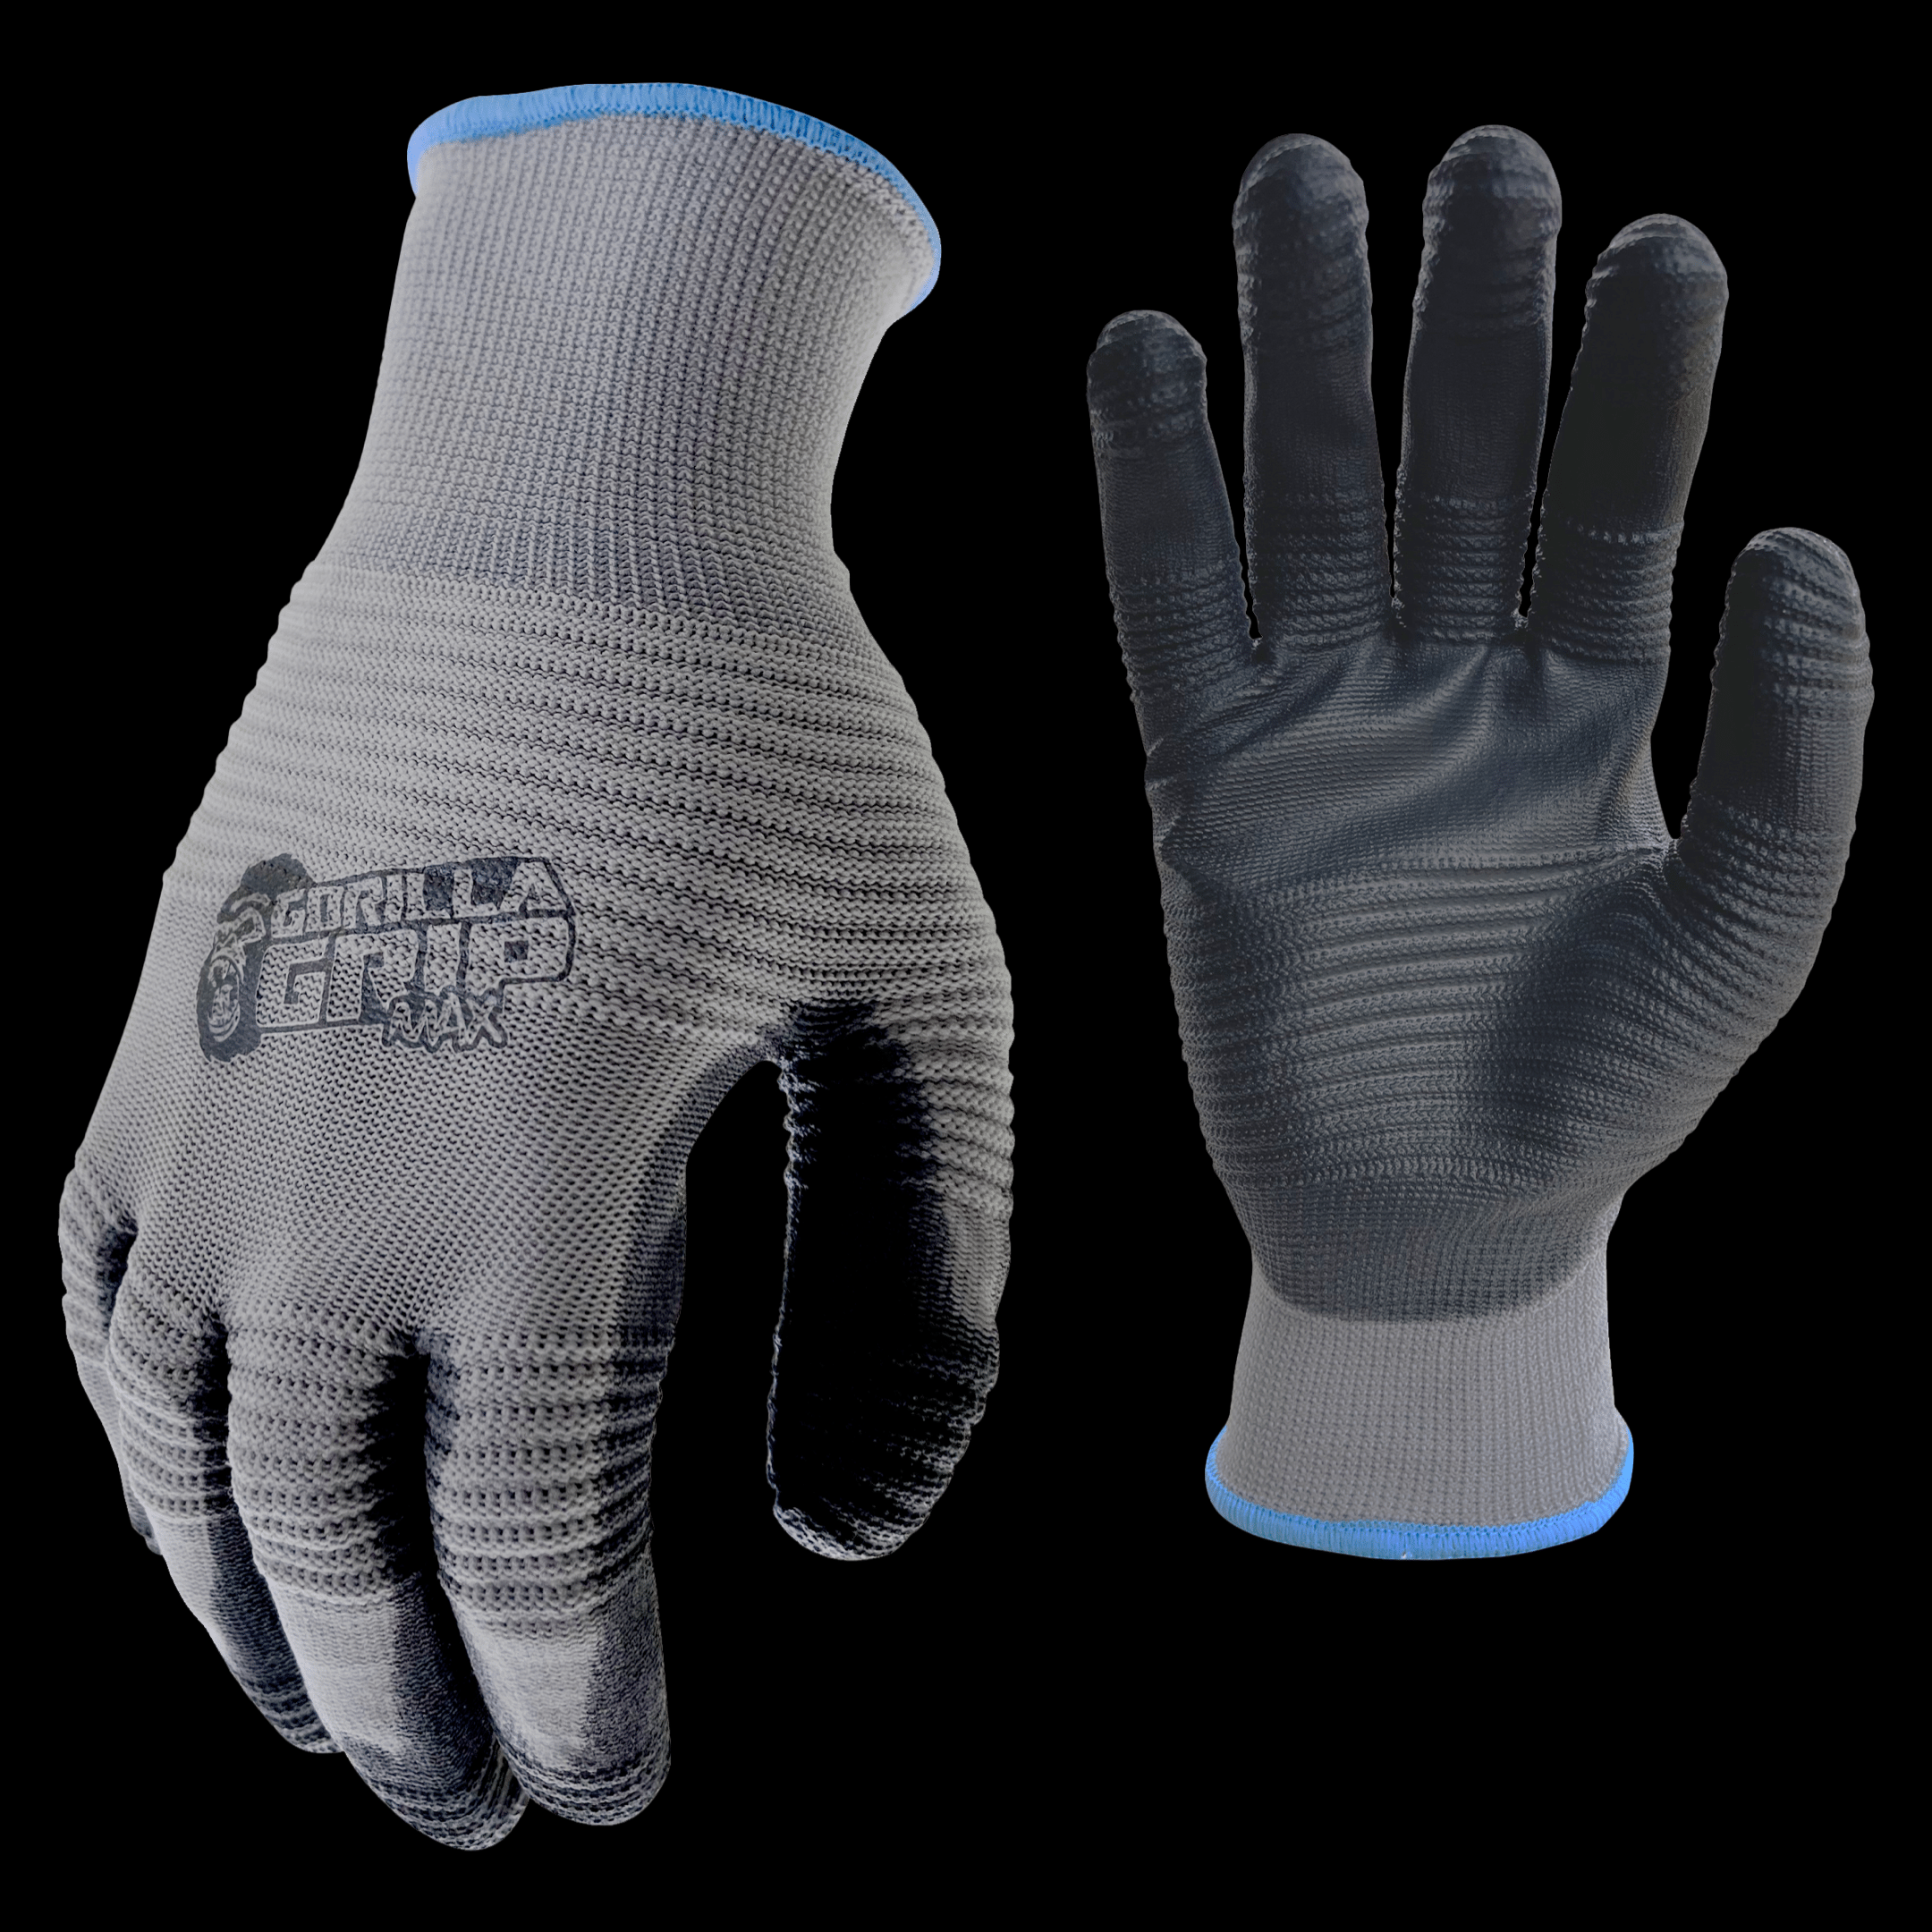 http://www.gorillagripgloves.com/wp-content/uploads/2022/04/max_image_1.png